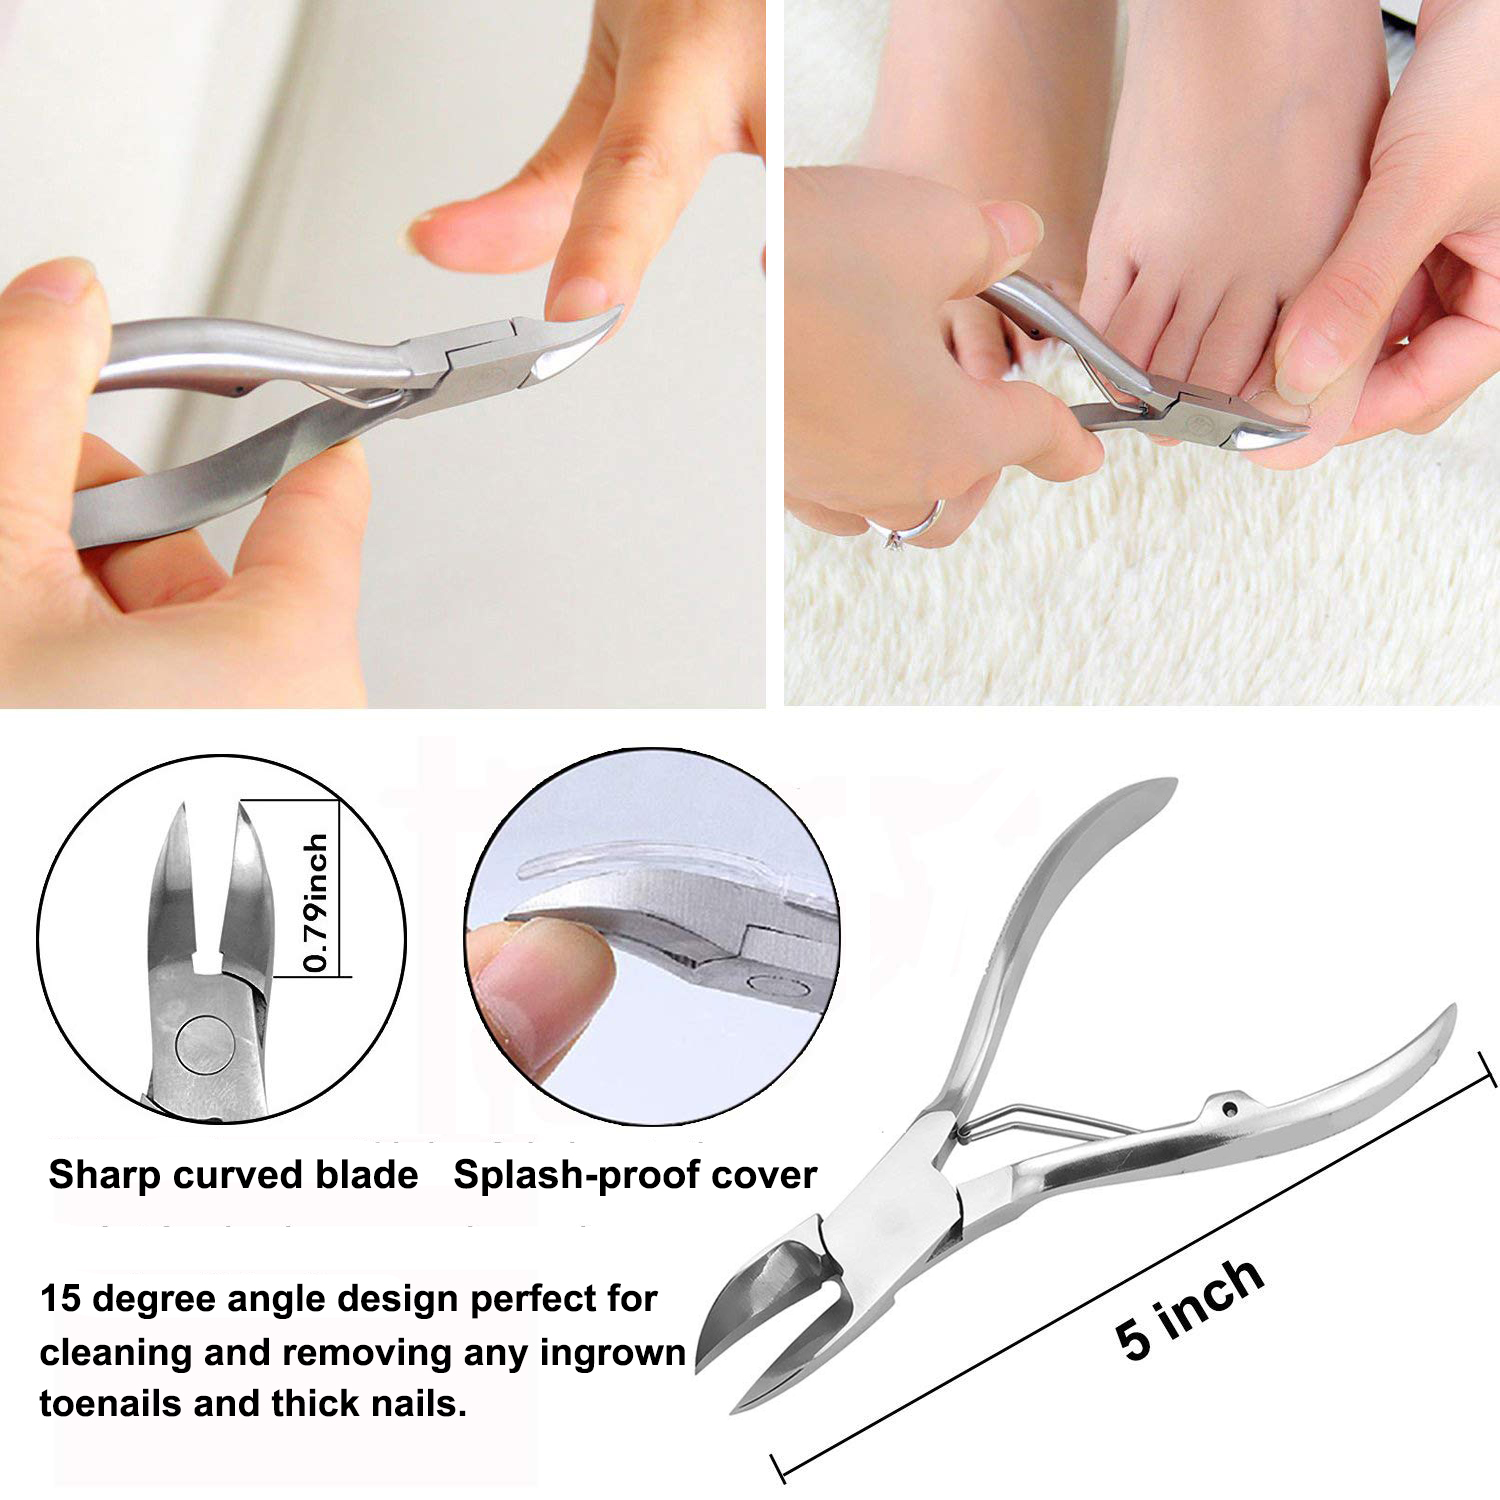 Stainless Steel Manicure Pedicure Foot Rasp Callus Remover Nail File  Ingrown Toenail Lifter Podiatry Chiropody Tools 4 Pc Set 